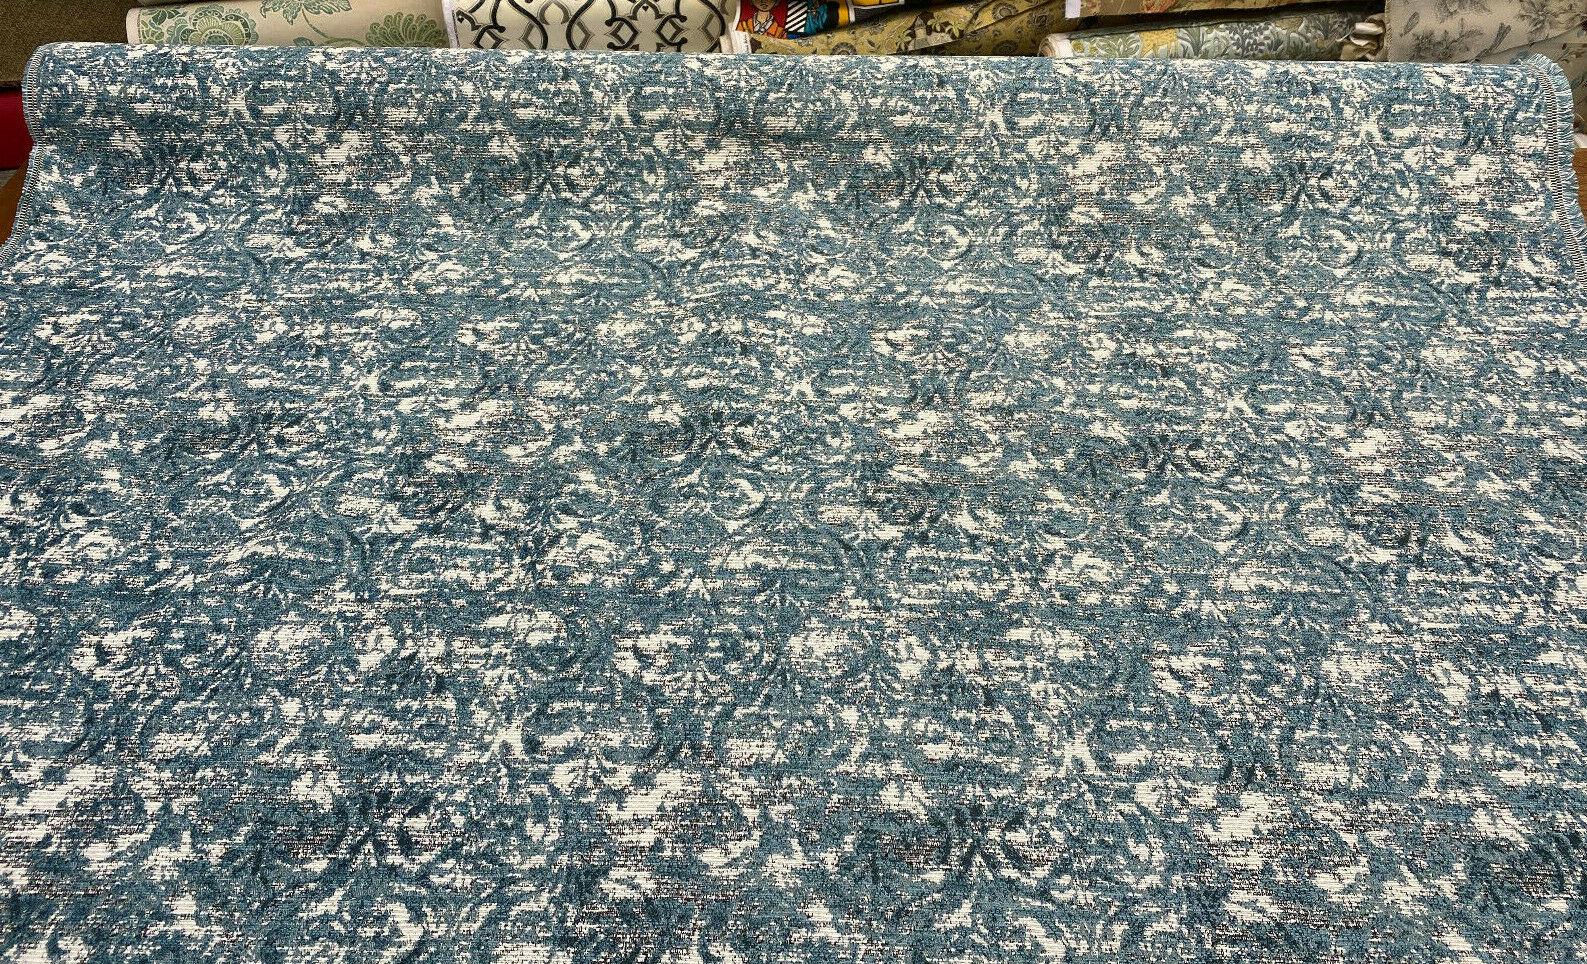 Mill Creek Beecher Aqua Teal Chenille Upholstery Fabric by the